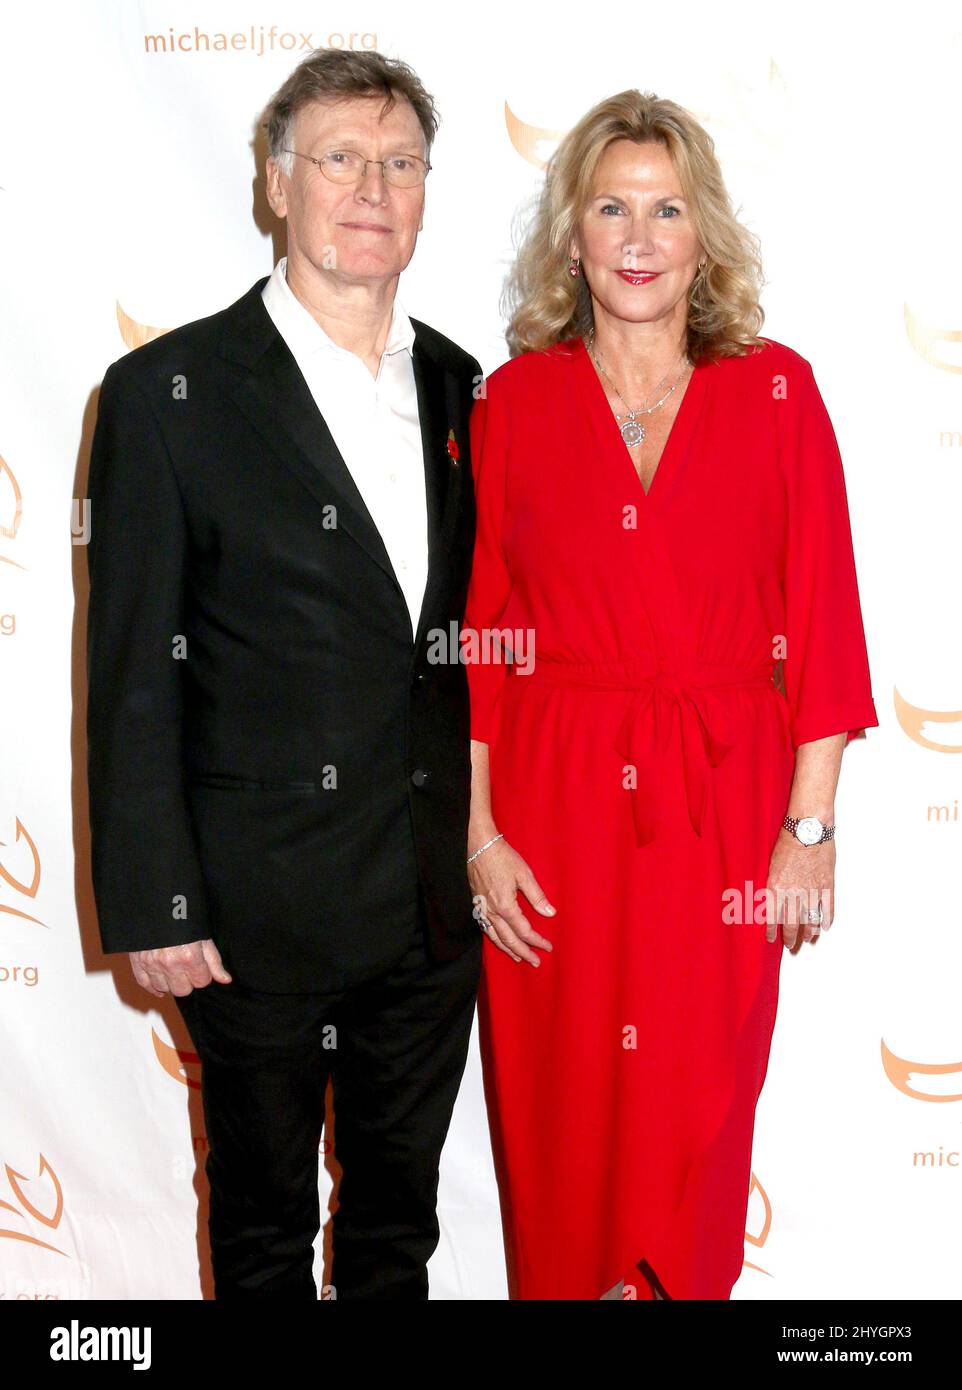 Steve Winwood & wife Eugenia Winwood at A Funny Thing Happened on the Way to Cure Parkinson's held at the Hilton New York on November 10, 2018 in New York City, NY Stock Photo